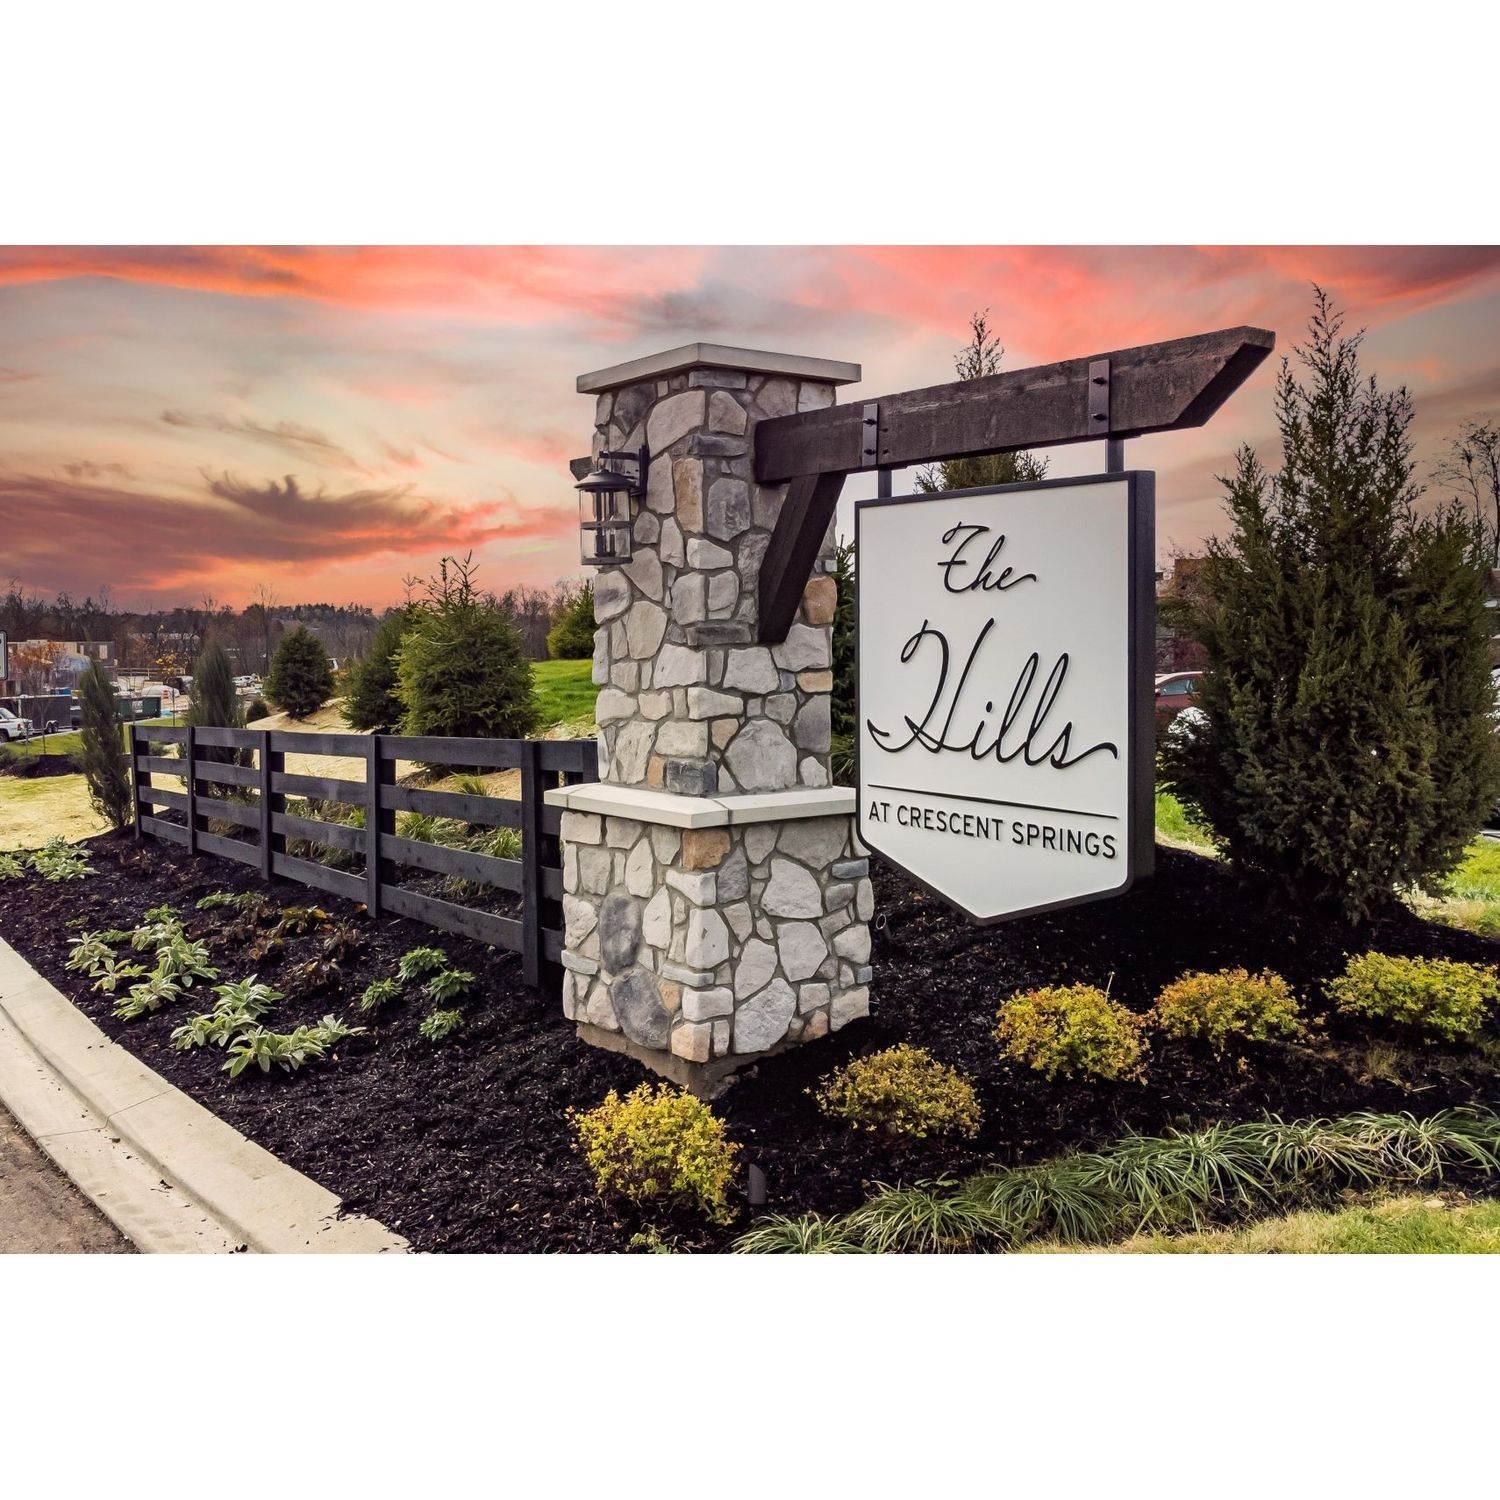 14. The Hills at Crescent Springs建於 2301 Woodhill Court, Crescent Springs, KY 41017